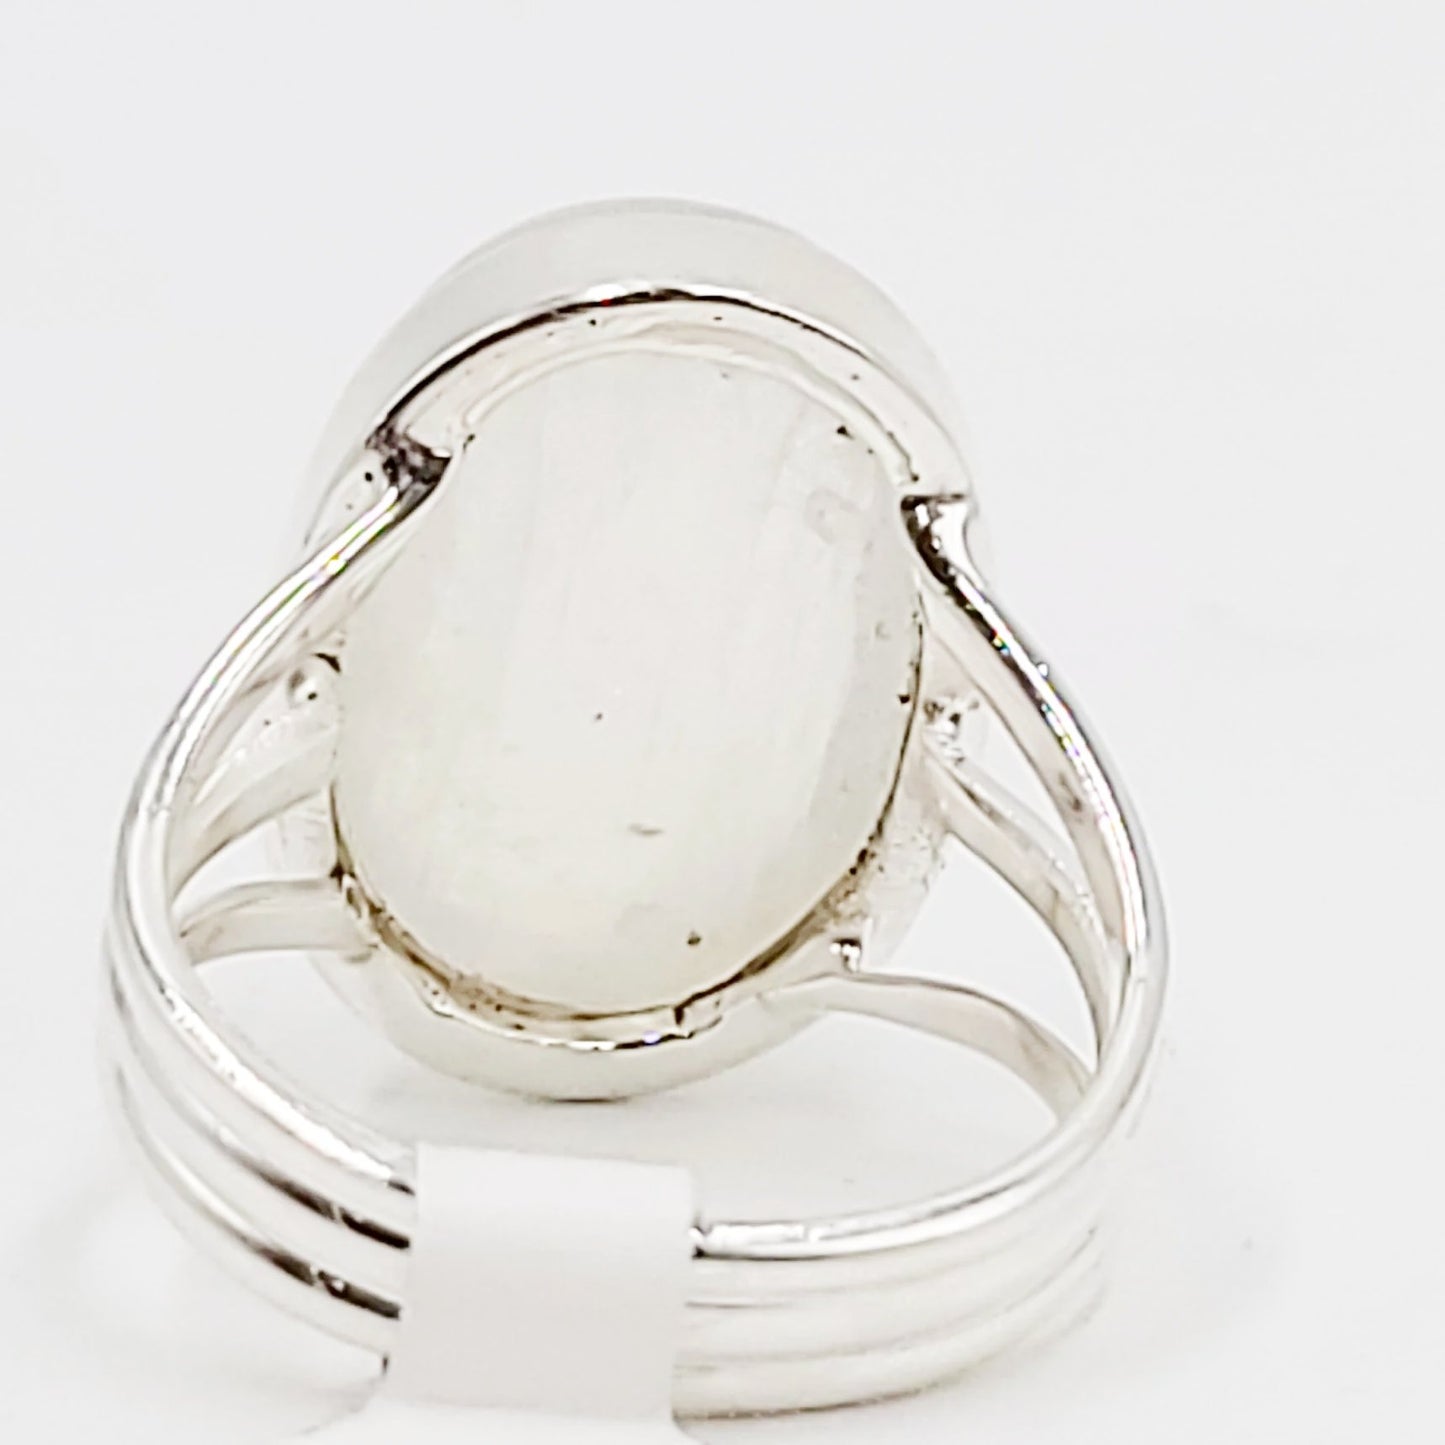 Rainbow Moonstone Ring Sterling Silver HQ Size 7